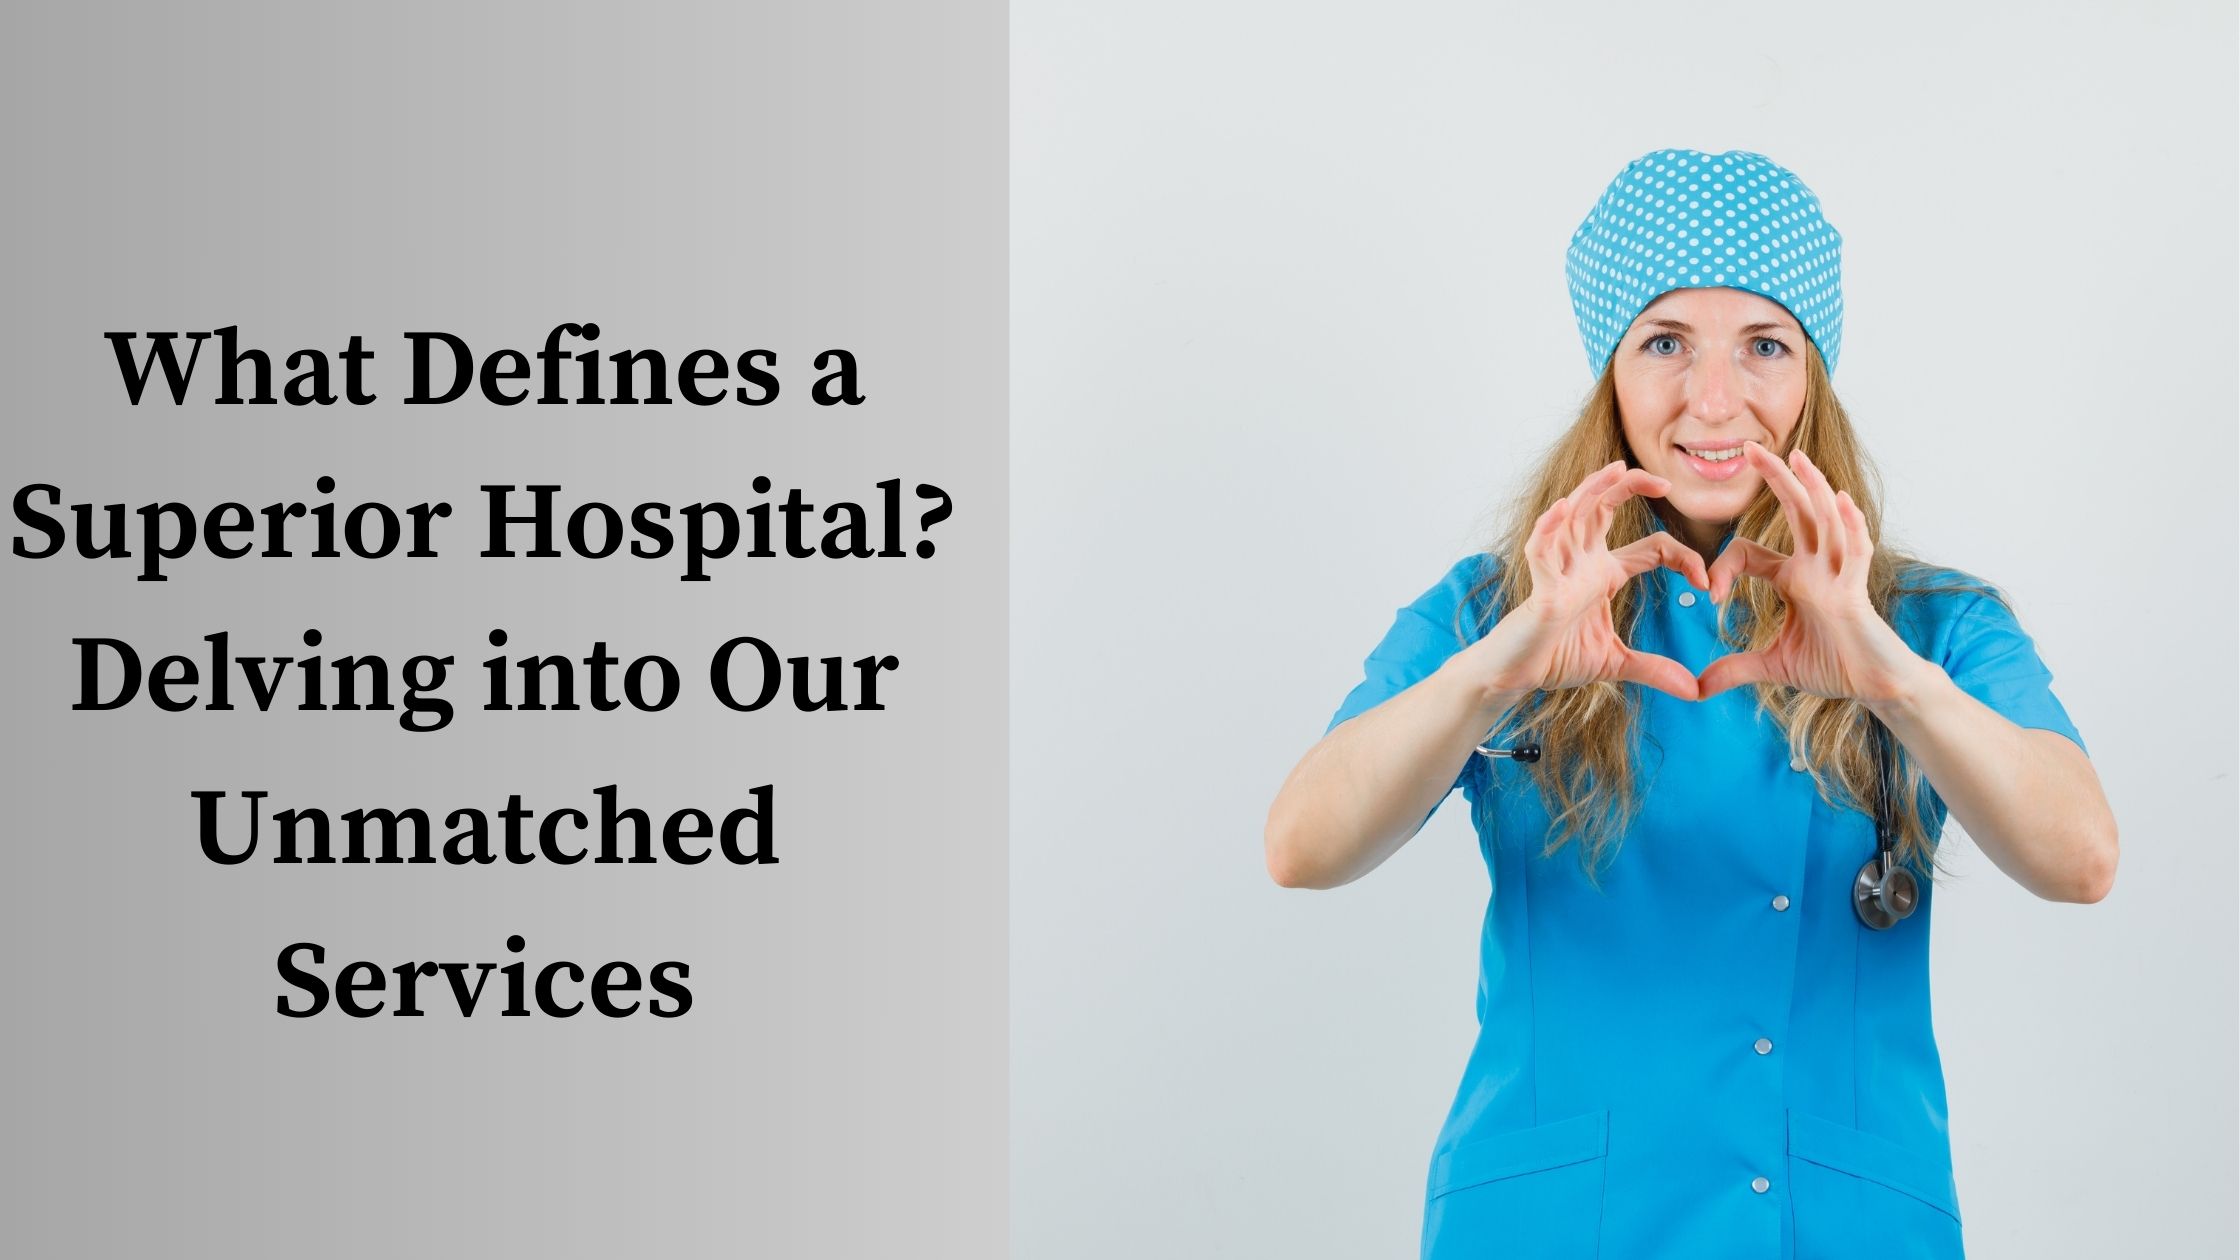 What Defines a Superior Hospital? Delving into Our Unmatched Services